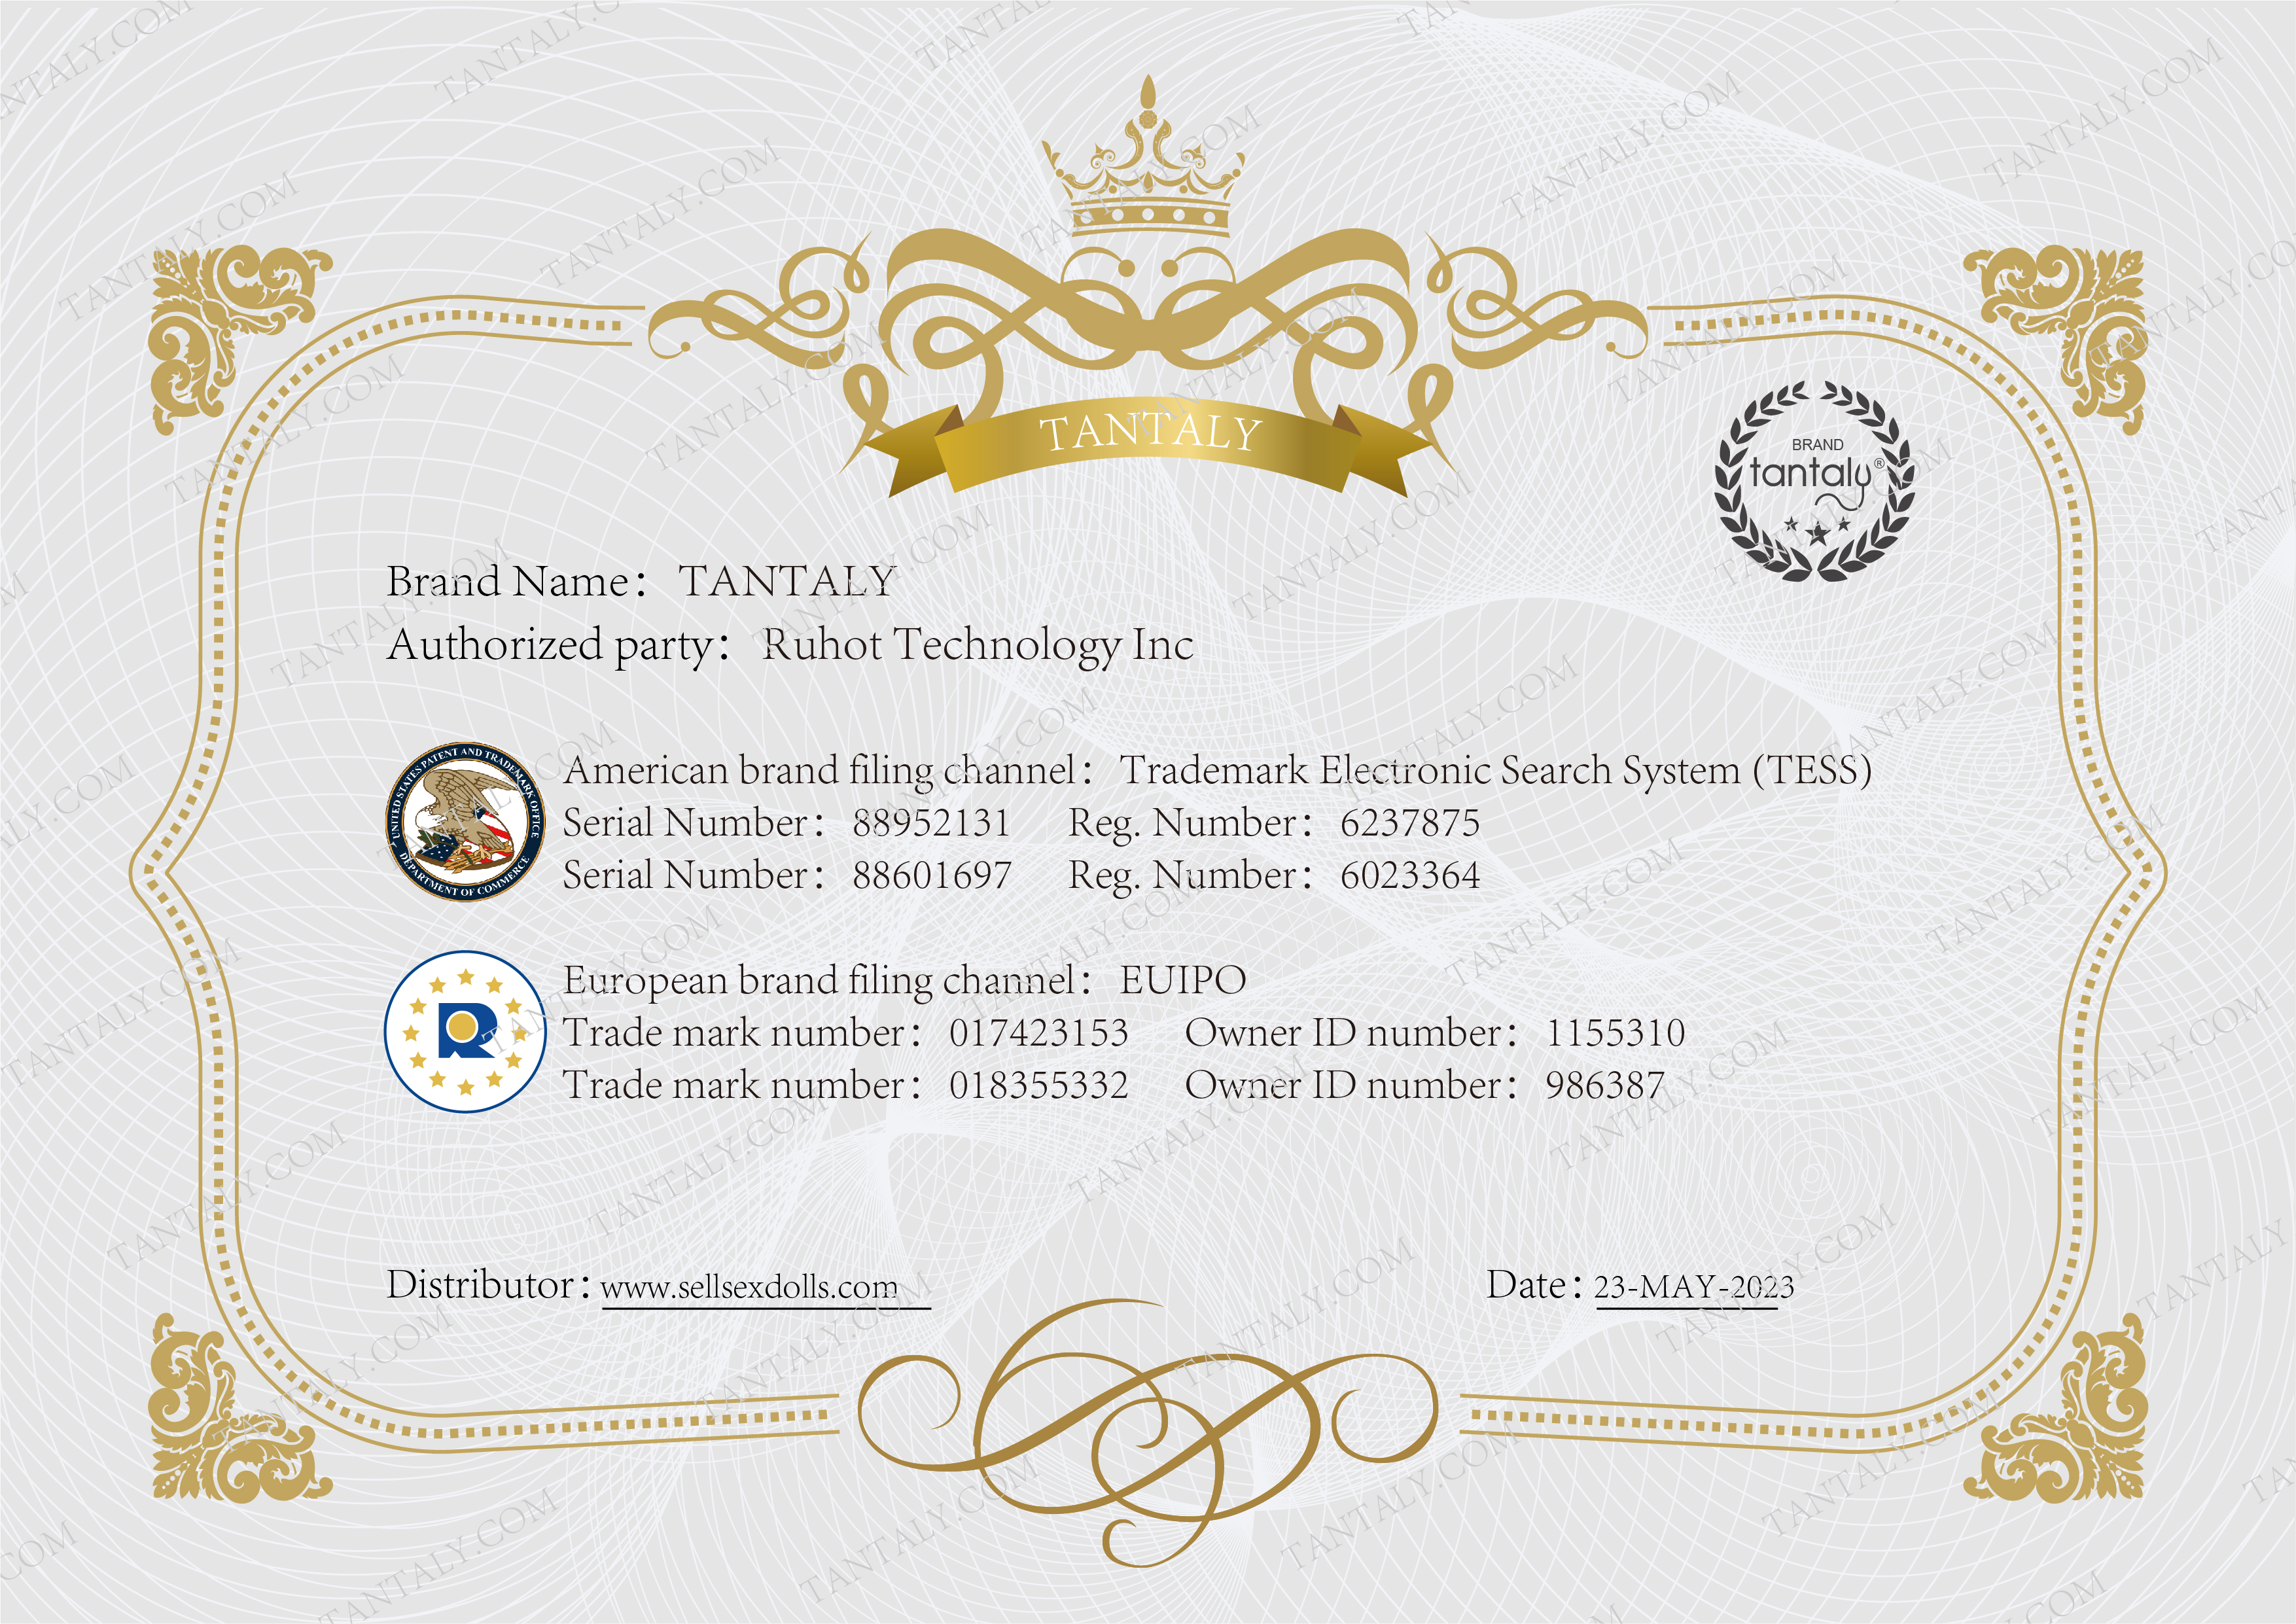 Tantaly Doll Certificate